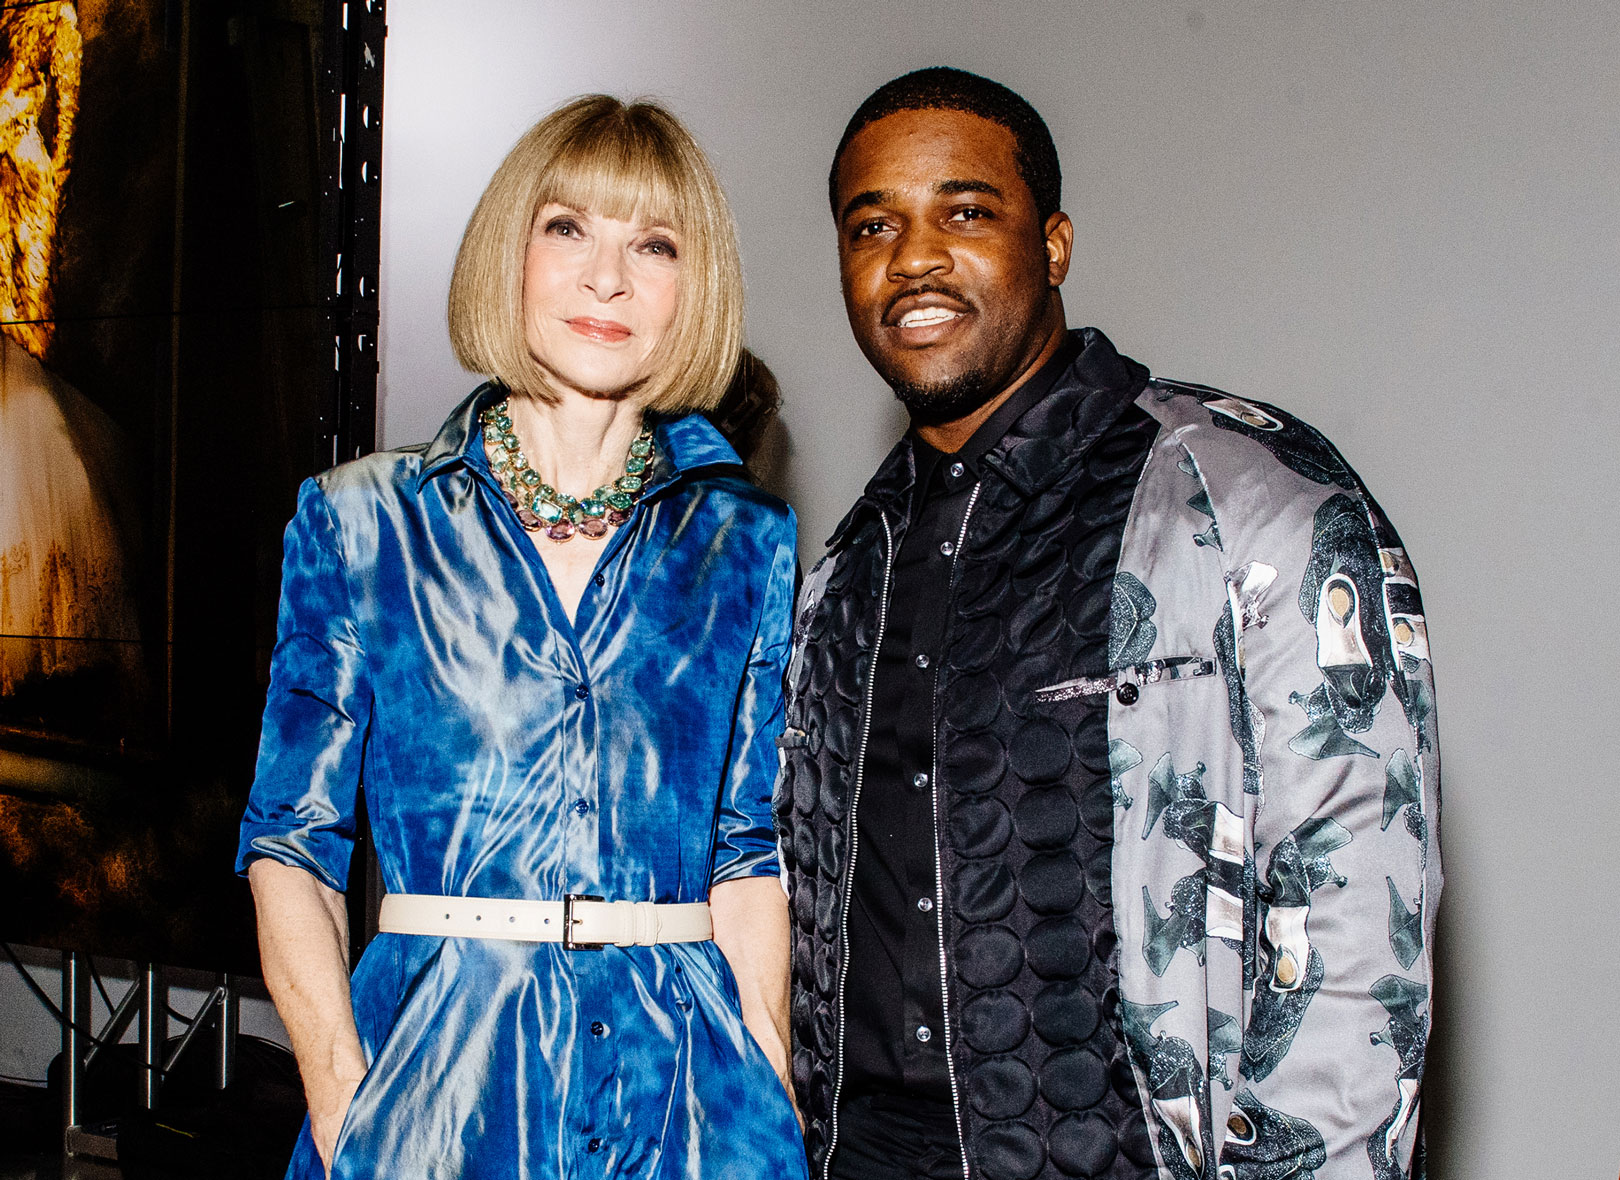 Anna Wintour and A$AP Ferg at Studio 525 in Chelsea